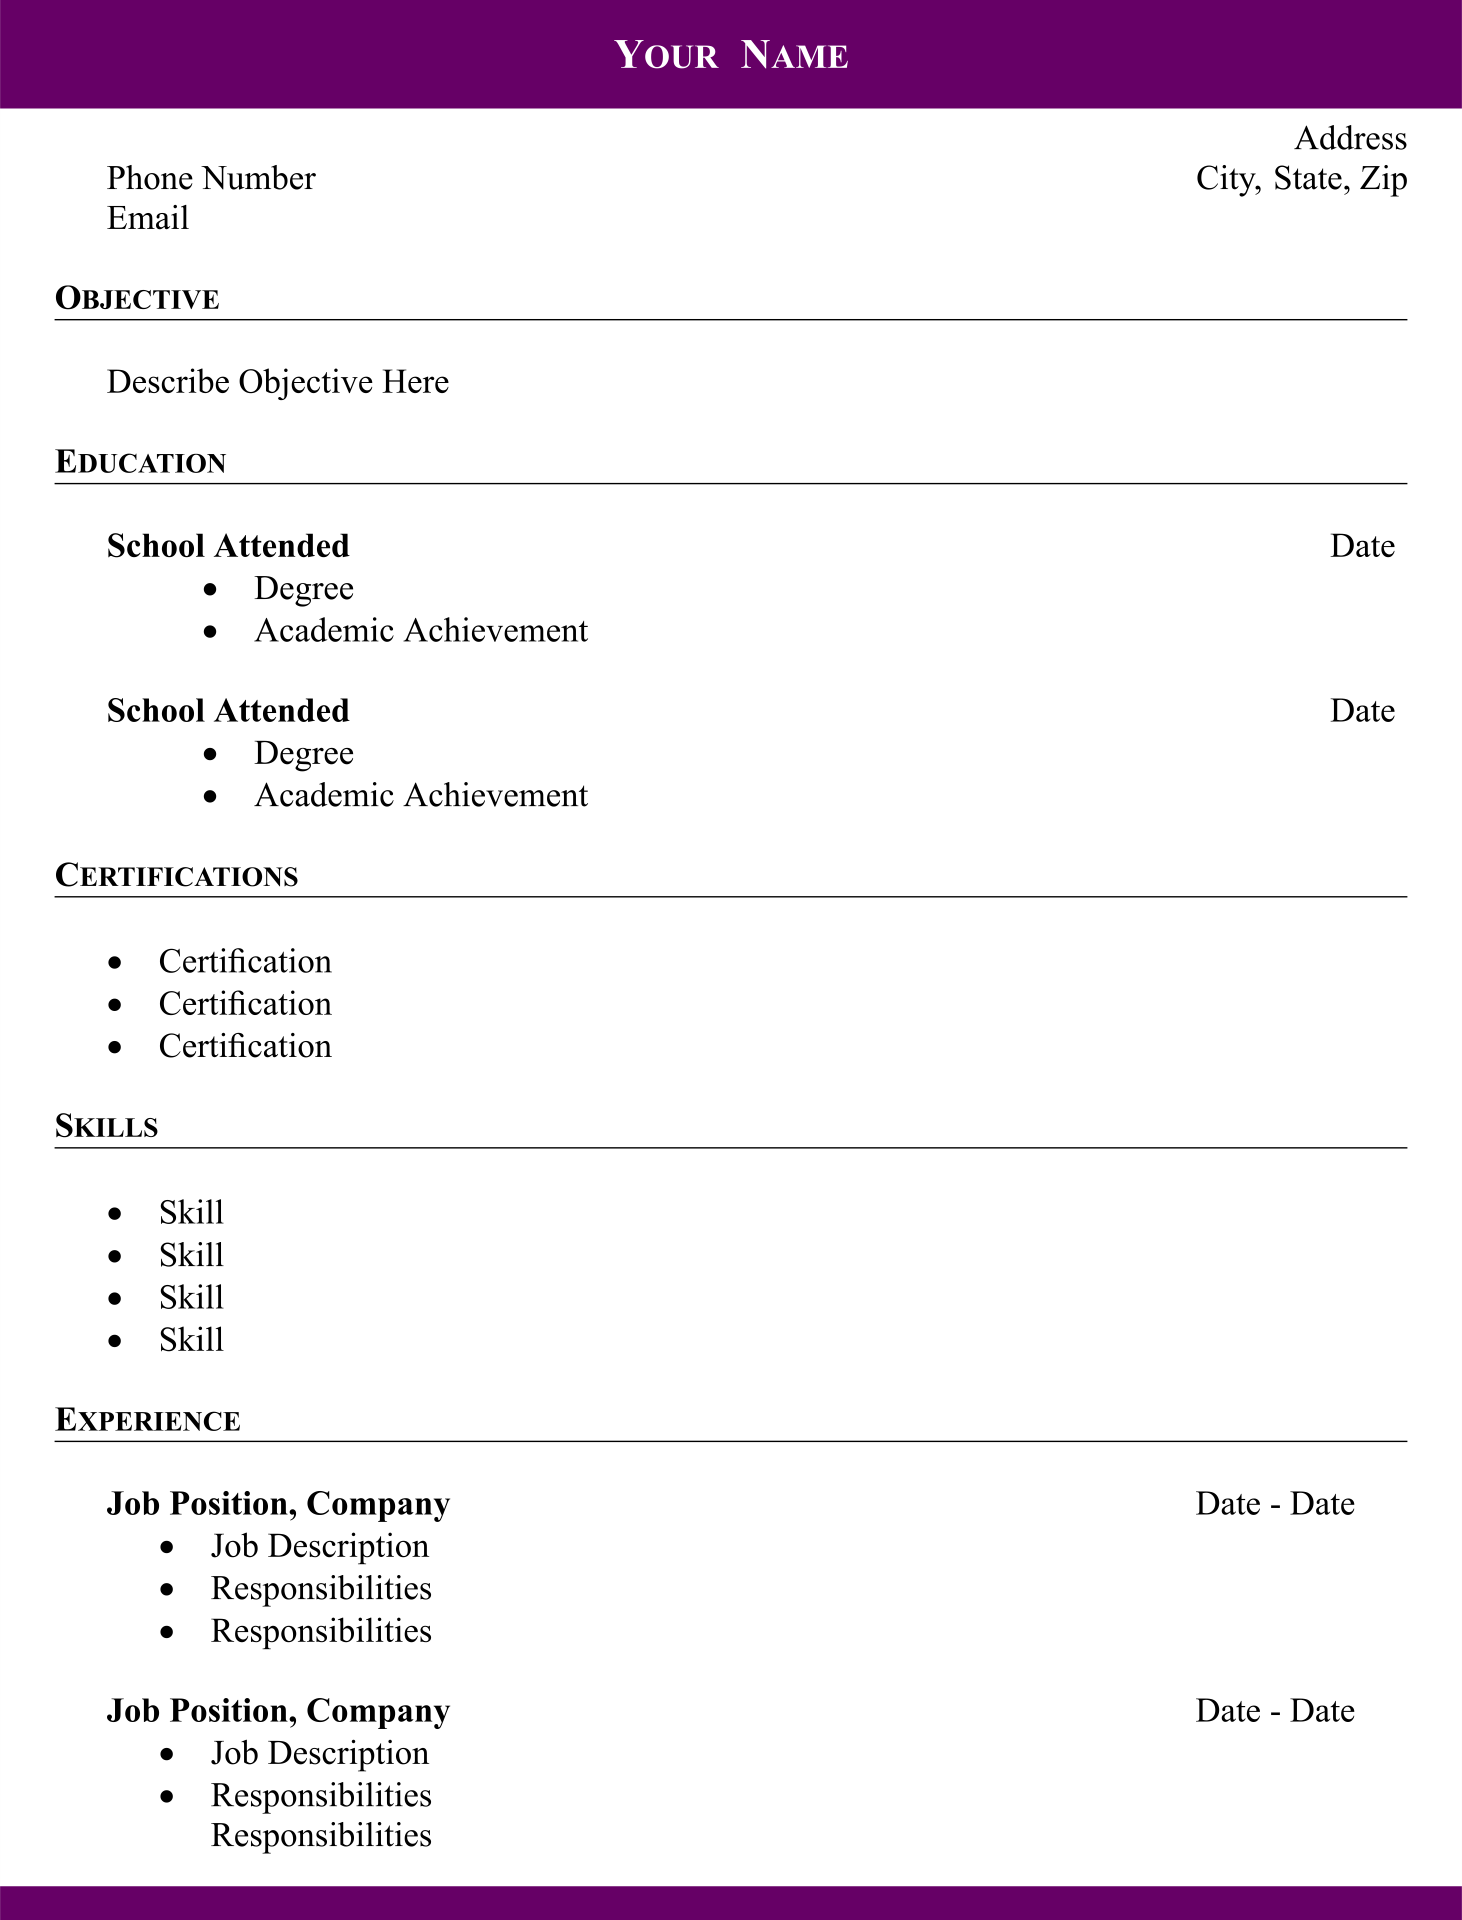 Blank Format Of Cv Download Free Blank Resume Forms PDF With Images Most Of Those Blank